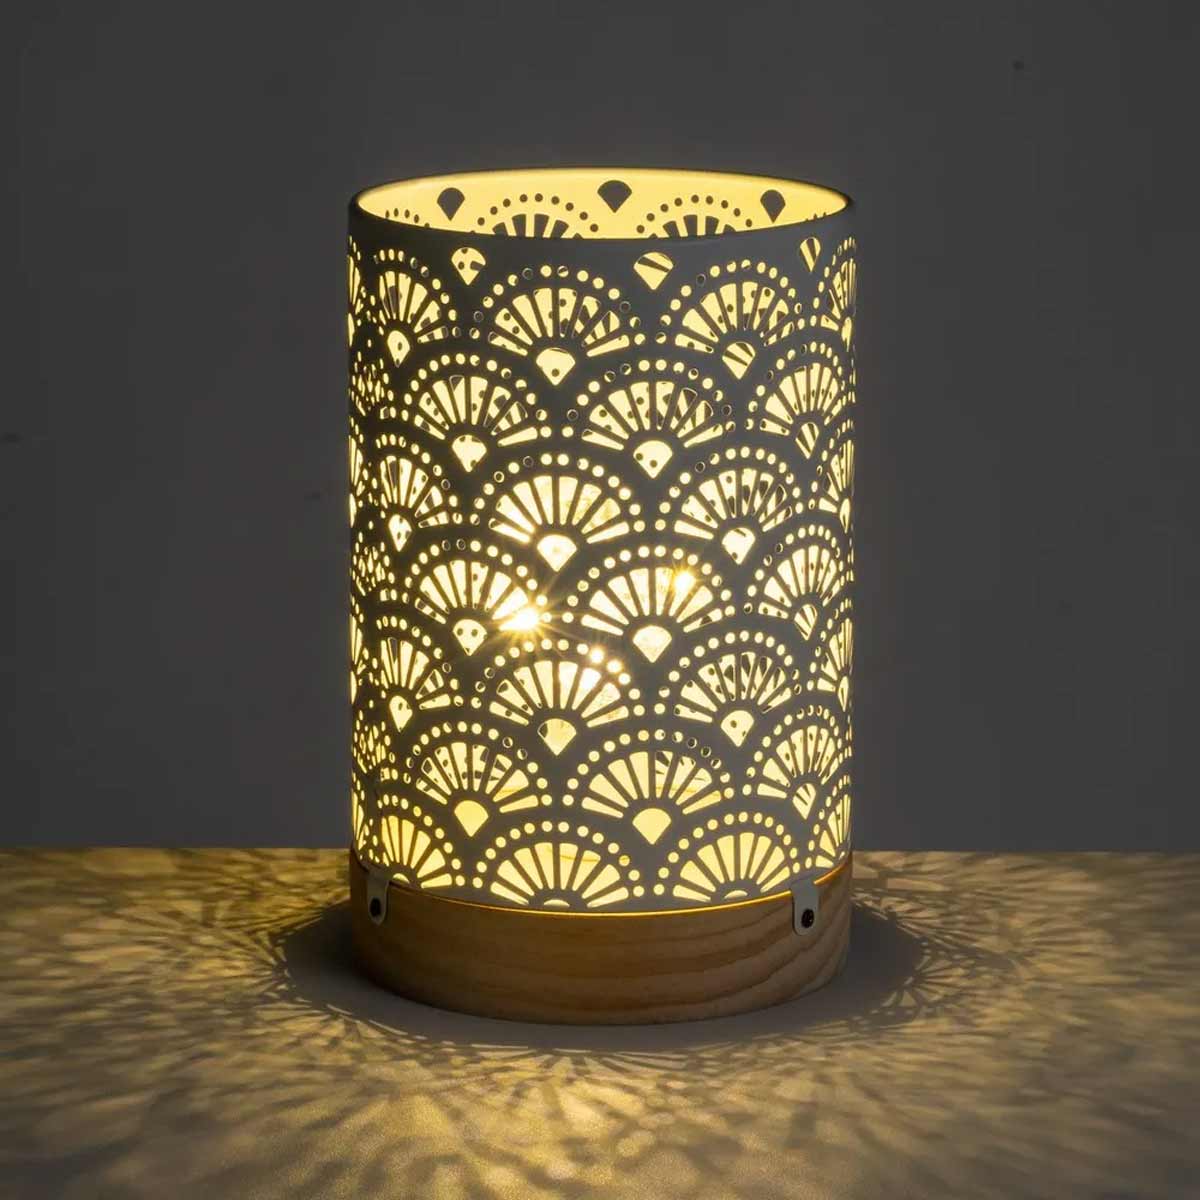 LED lamp in metal and wood 20 cm